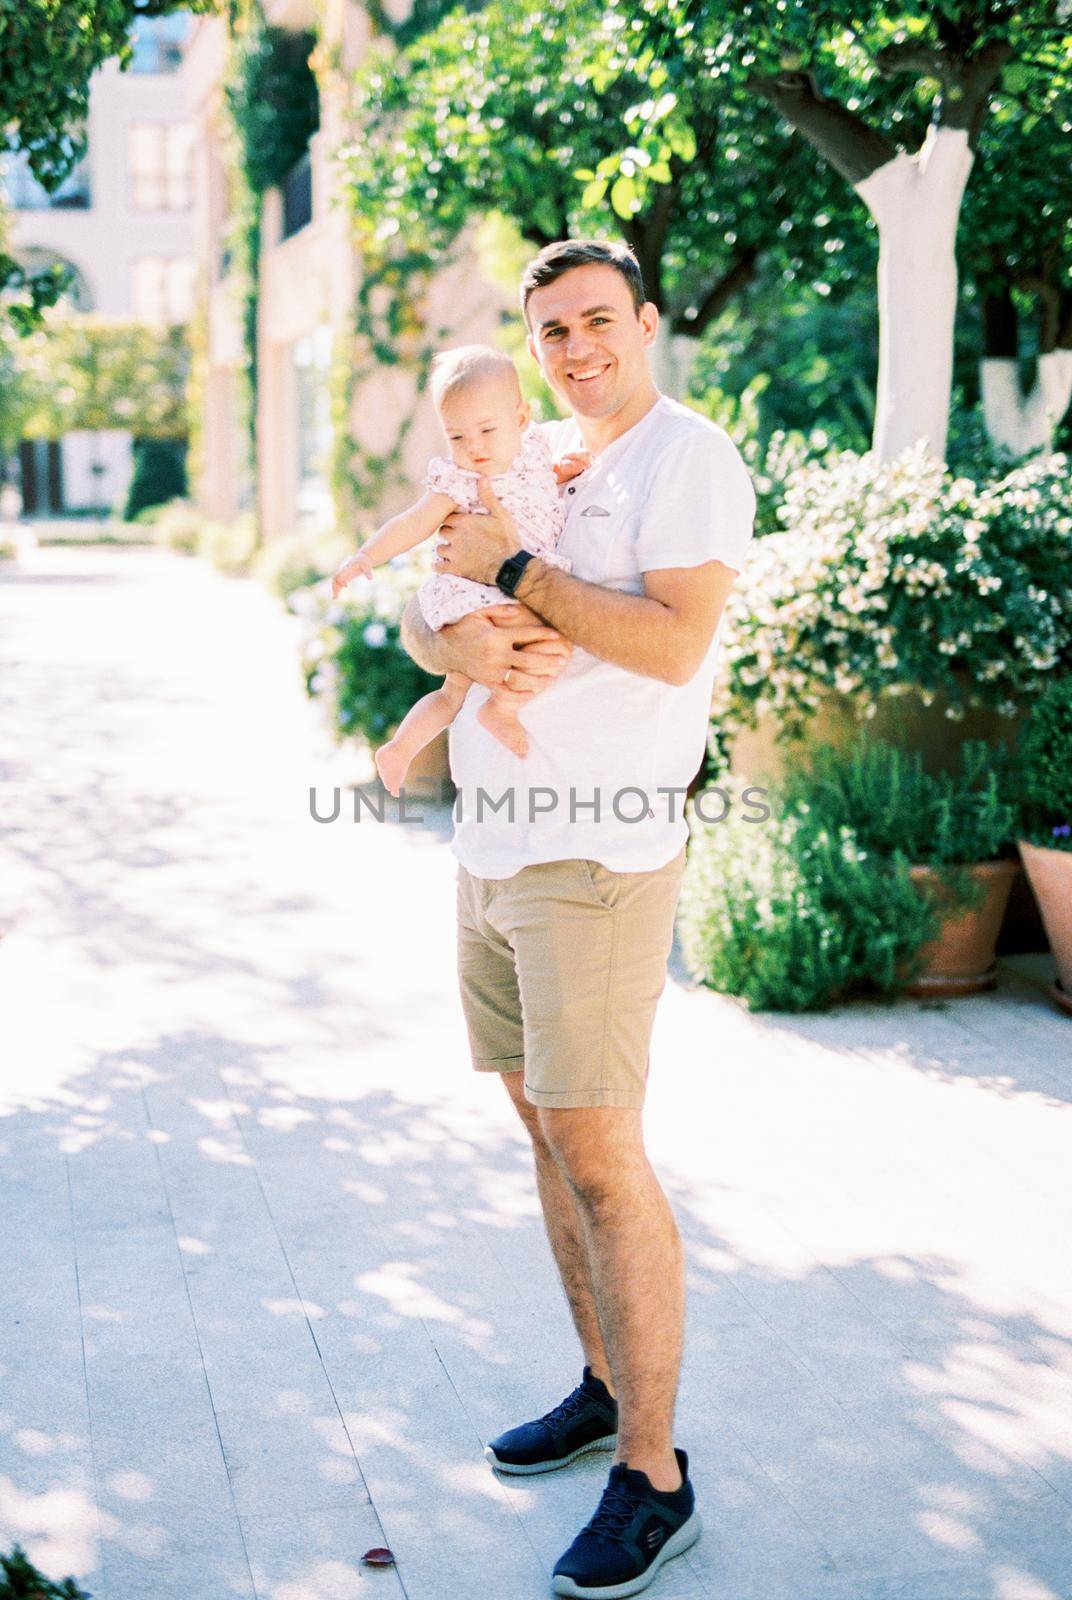 Smiling dad with a little girl in his arms stands on the street near flower pots by Nadtochiy